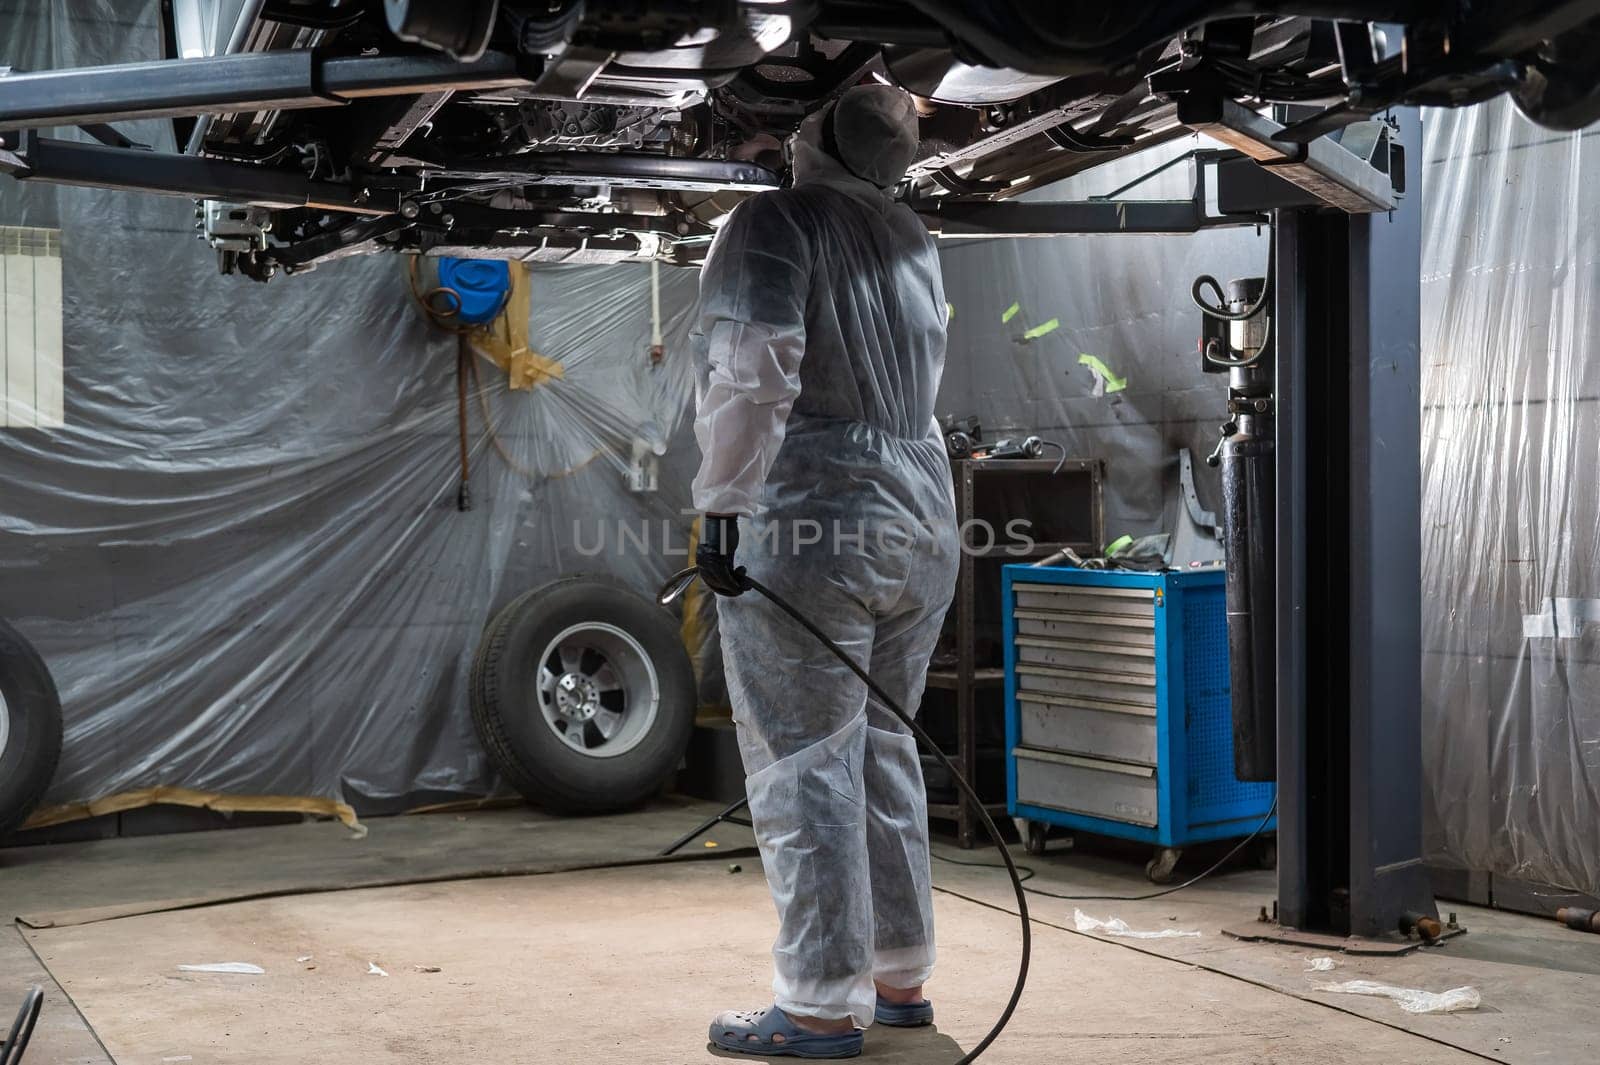 The master sprays an anti-corrosion compound on the bottom of the car